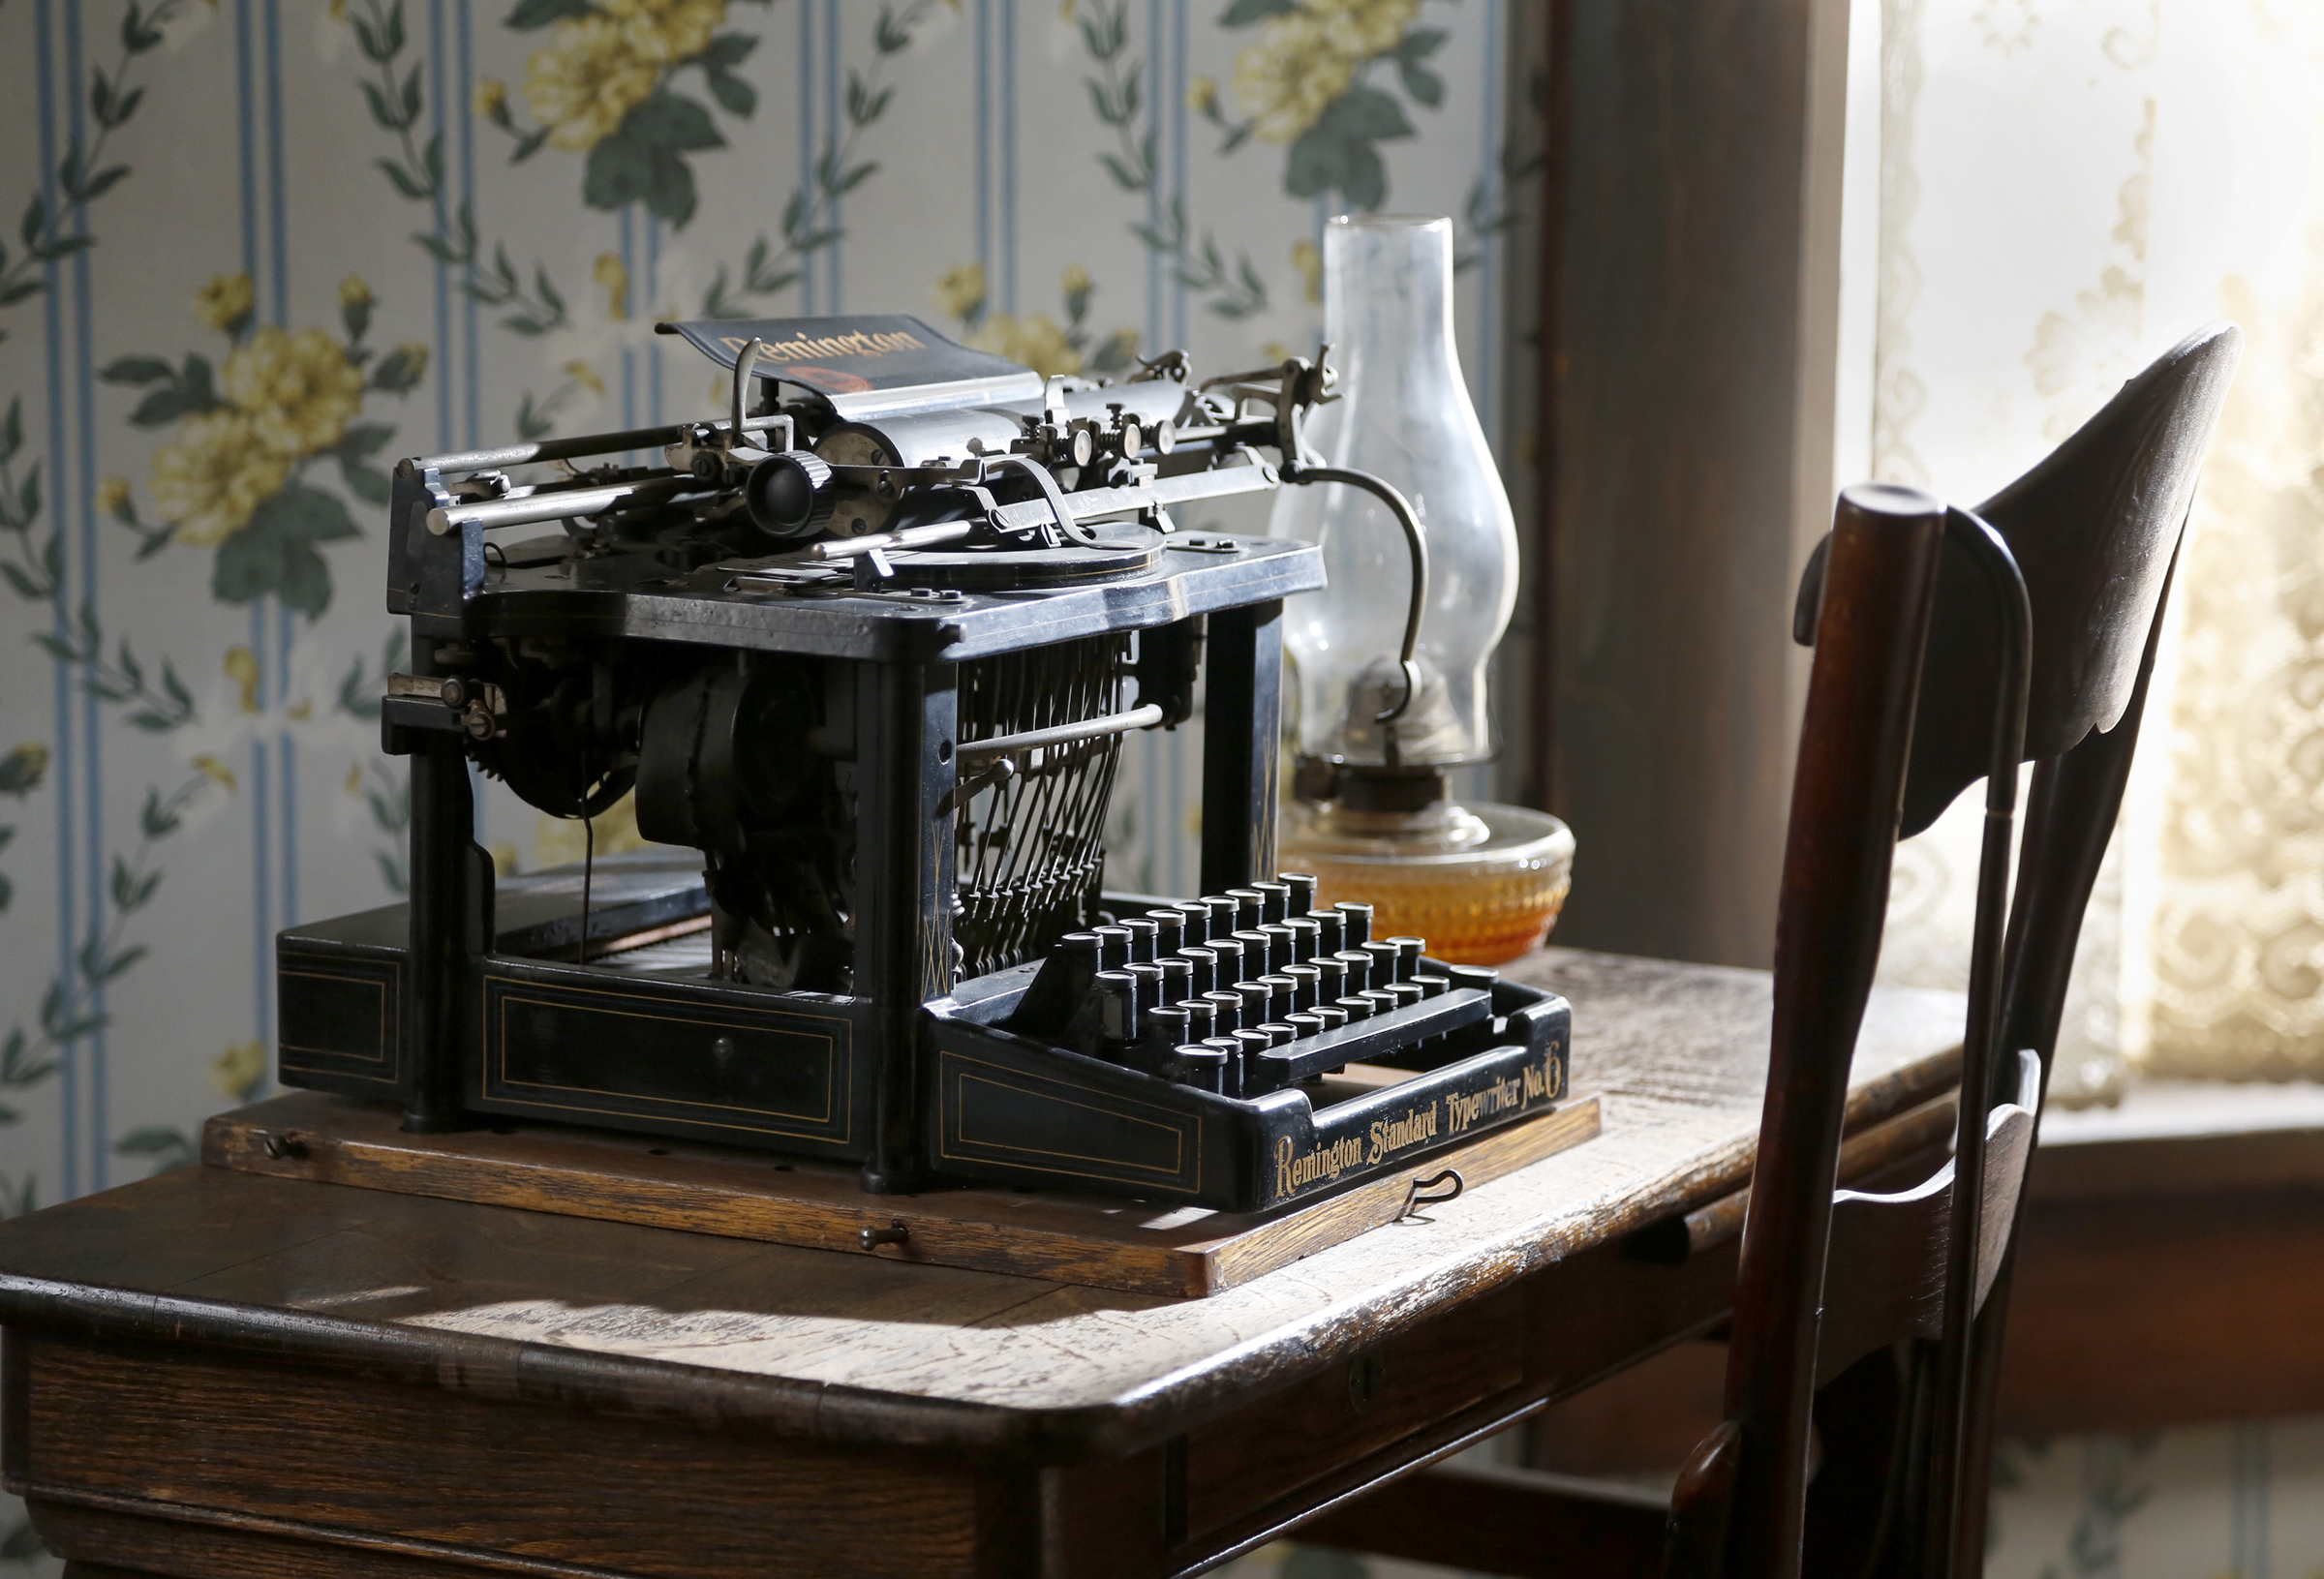 In addition to composing poems and literature, Paul Laurence Dunbar used a Remington Standard typewriter to write his work, editorials for newspapers and for correspondence.  LISA POWELL / STAFF